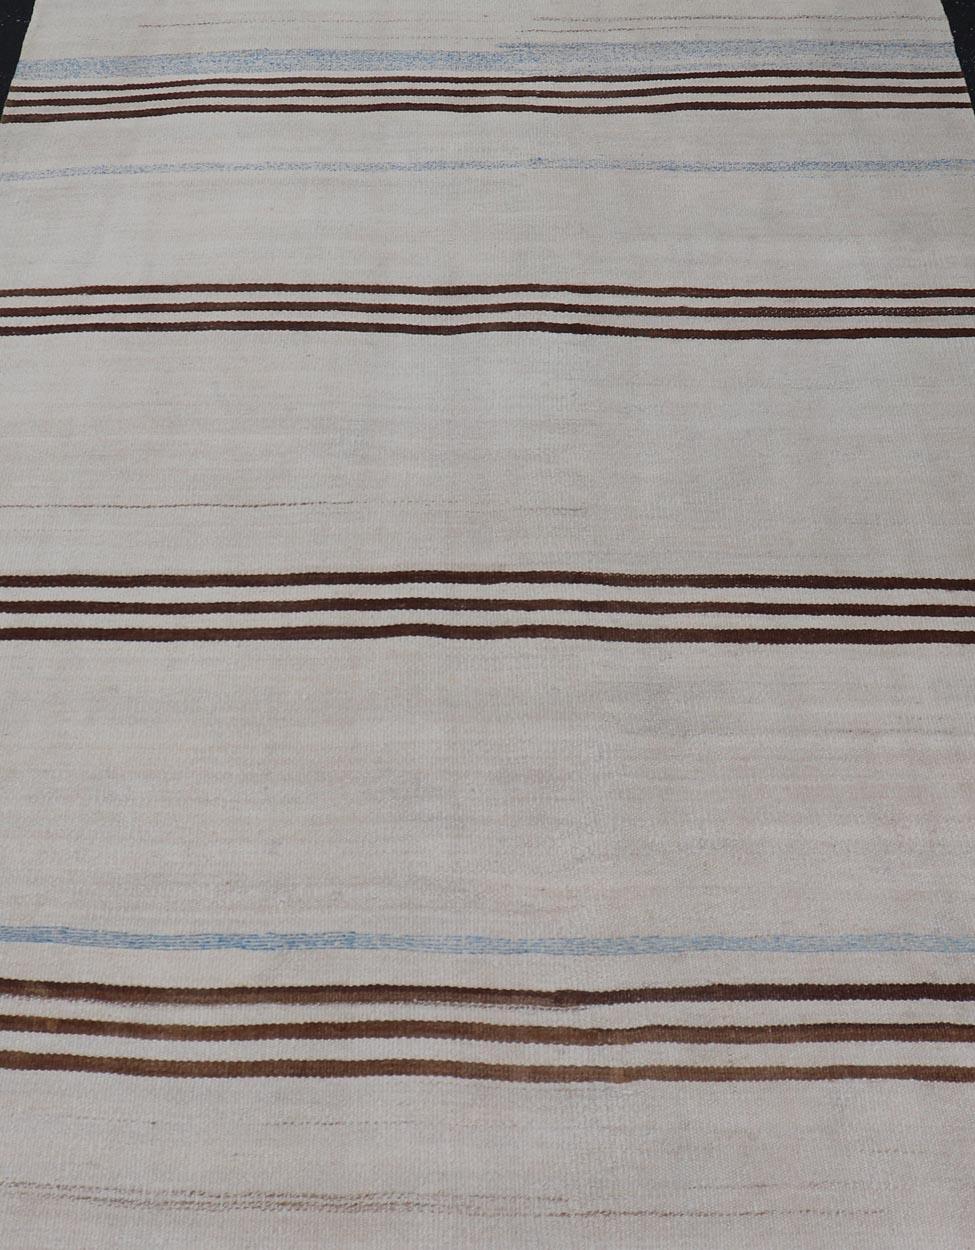 Wool Striped Turkish Vintage Kilim Flat-Weave Rug in Brown's and Ivory For Sale